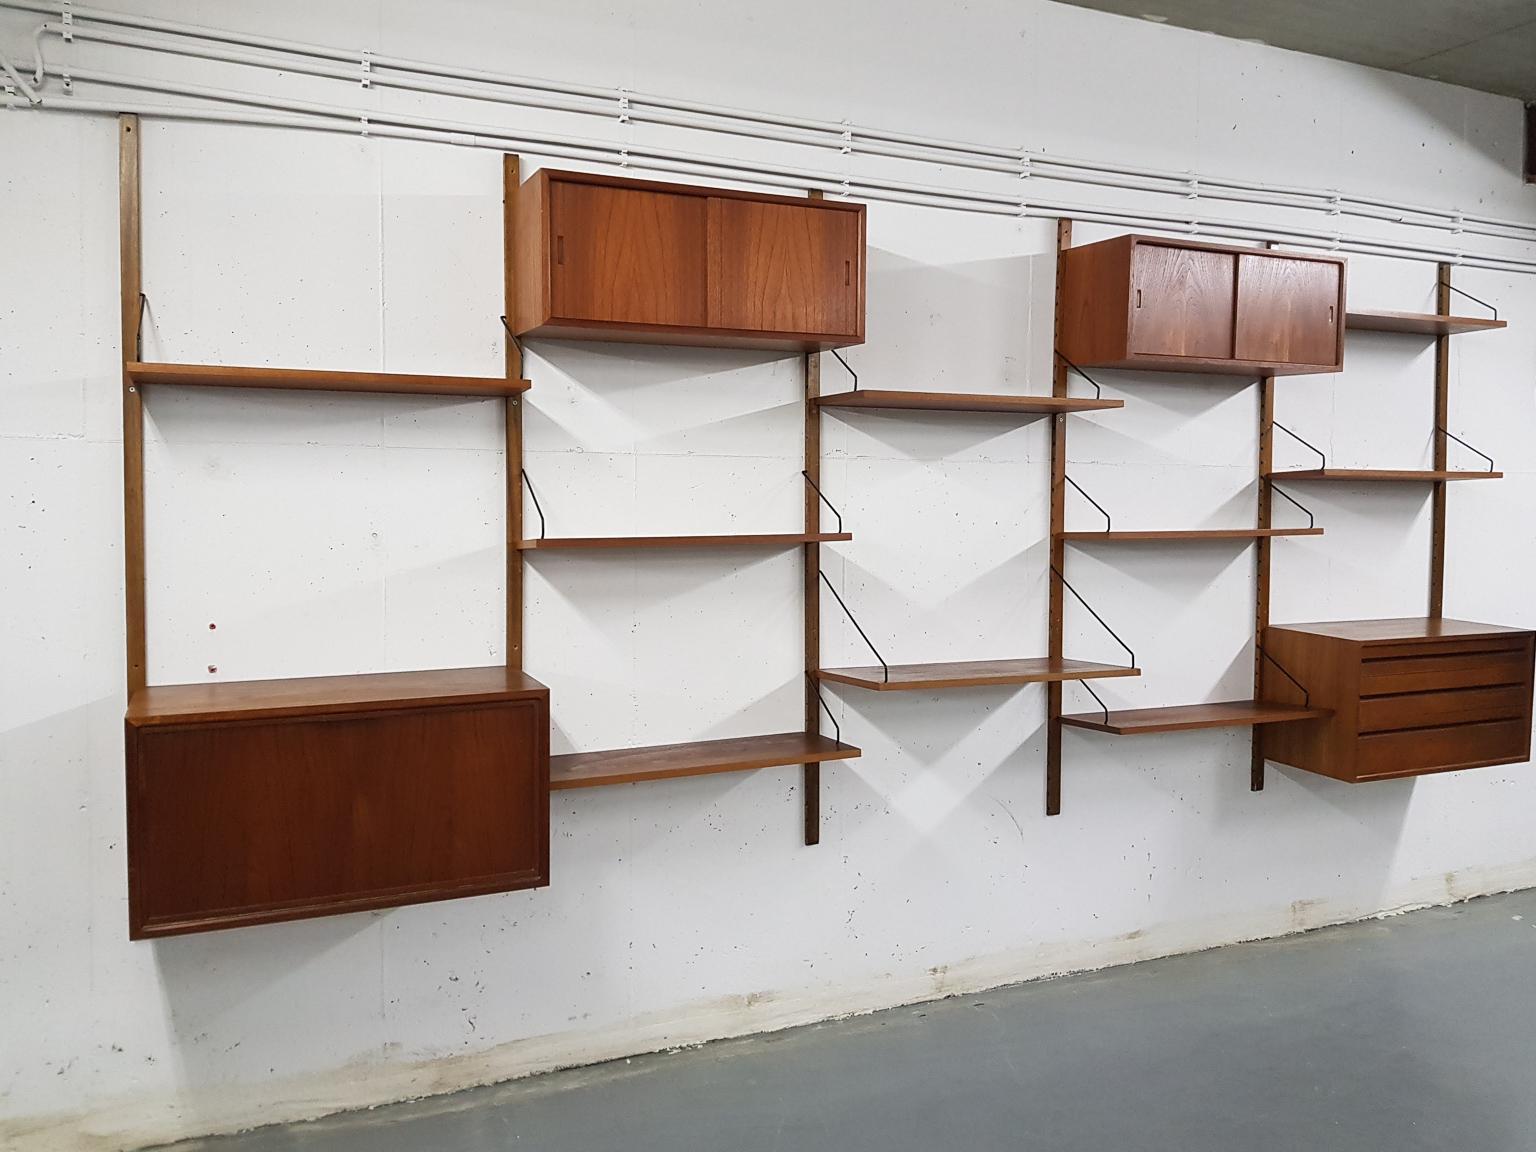 Extra large Danish design wall system or shelving unit by Poul Cadovius for Royal System, designed in Denmark in 1948.

When you ask someone to think of an European midcentury wall unit, most will probably think of Poul Cadovius and his shelving